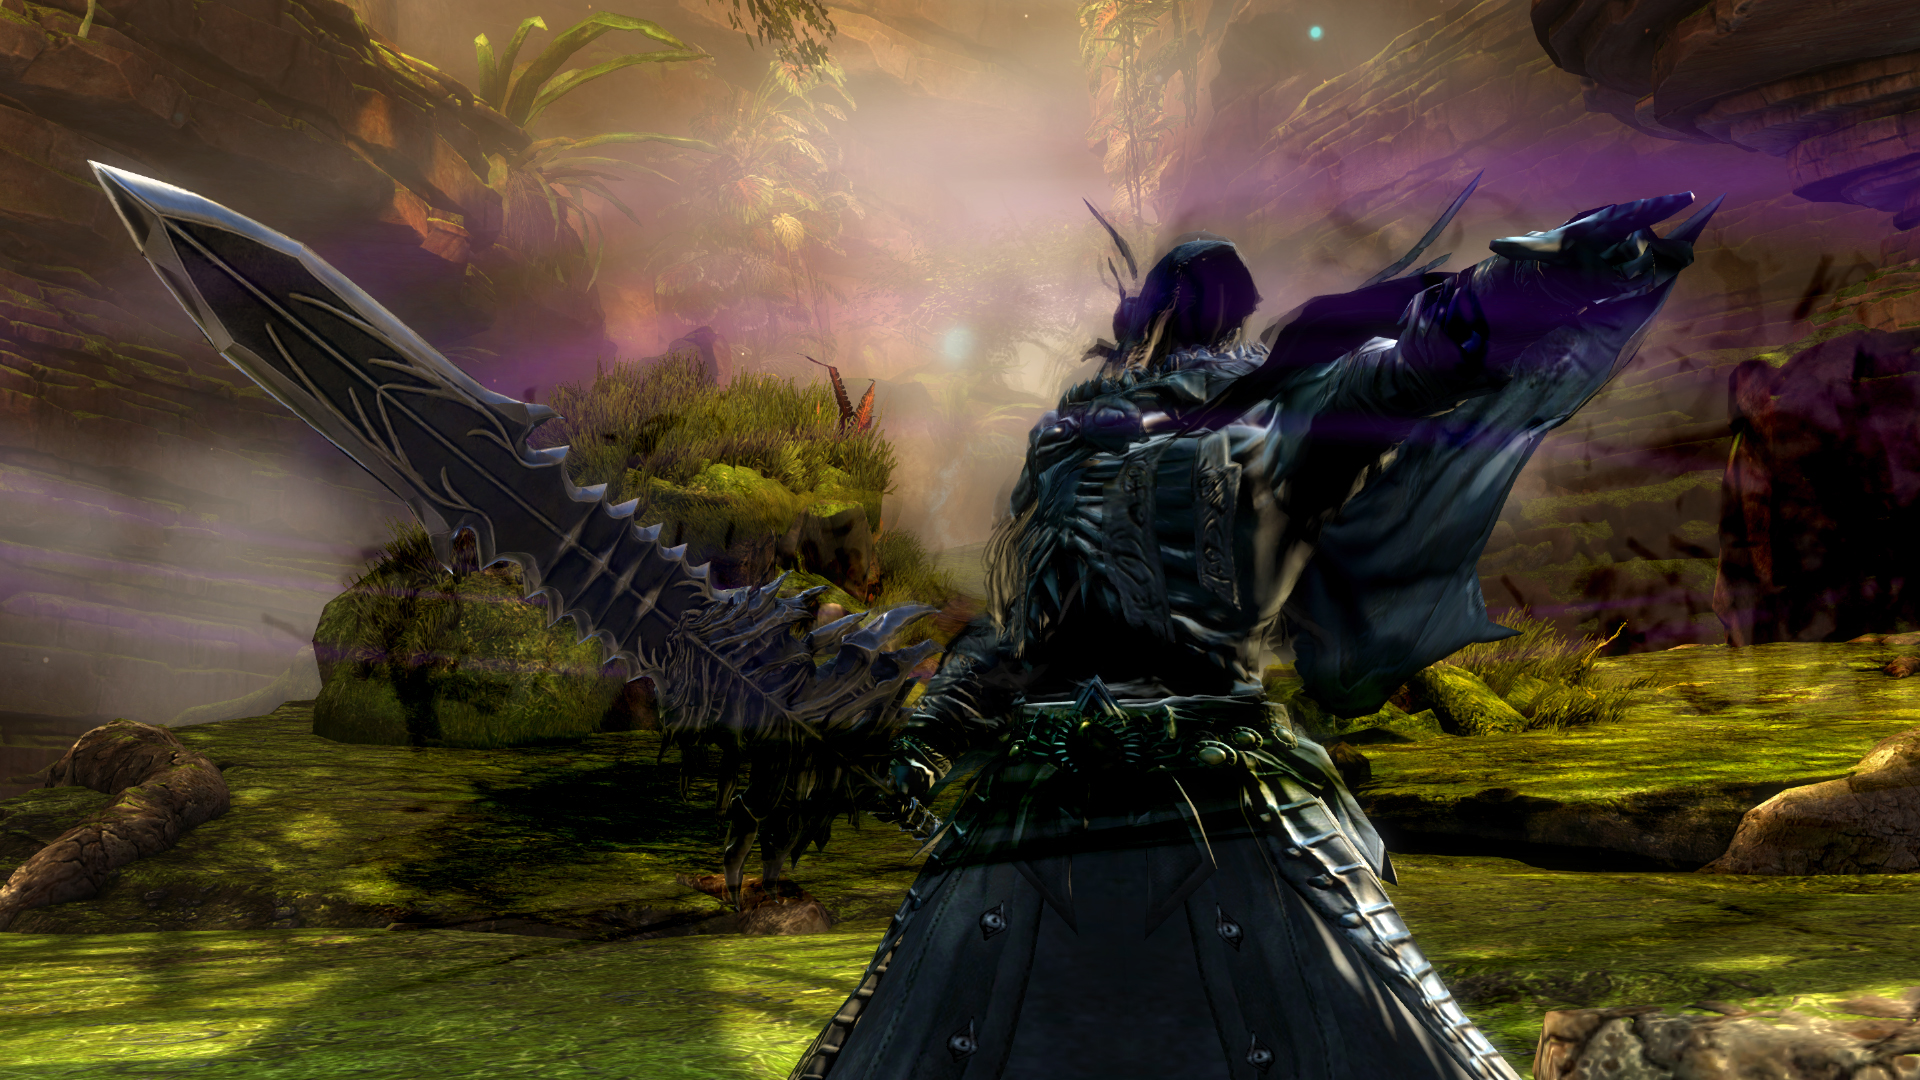 Reaper of the Labyrinth - Guild Wars 2 Wiki (GW2W)